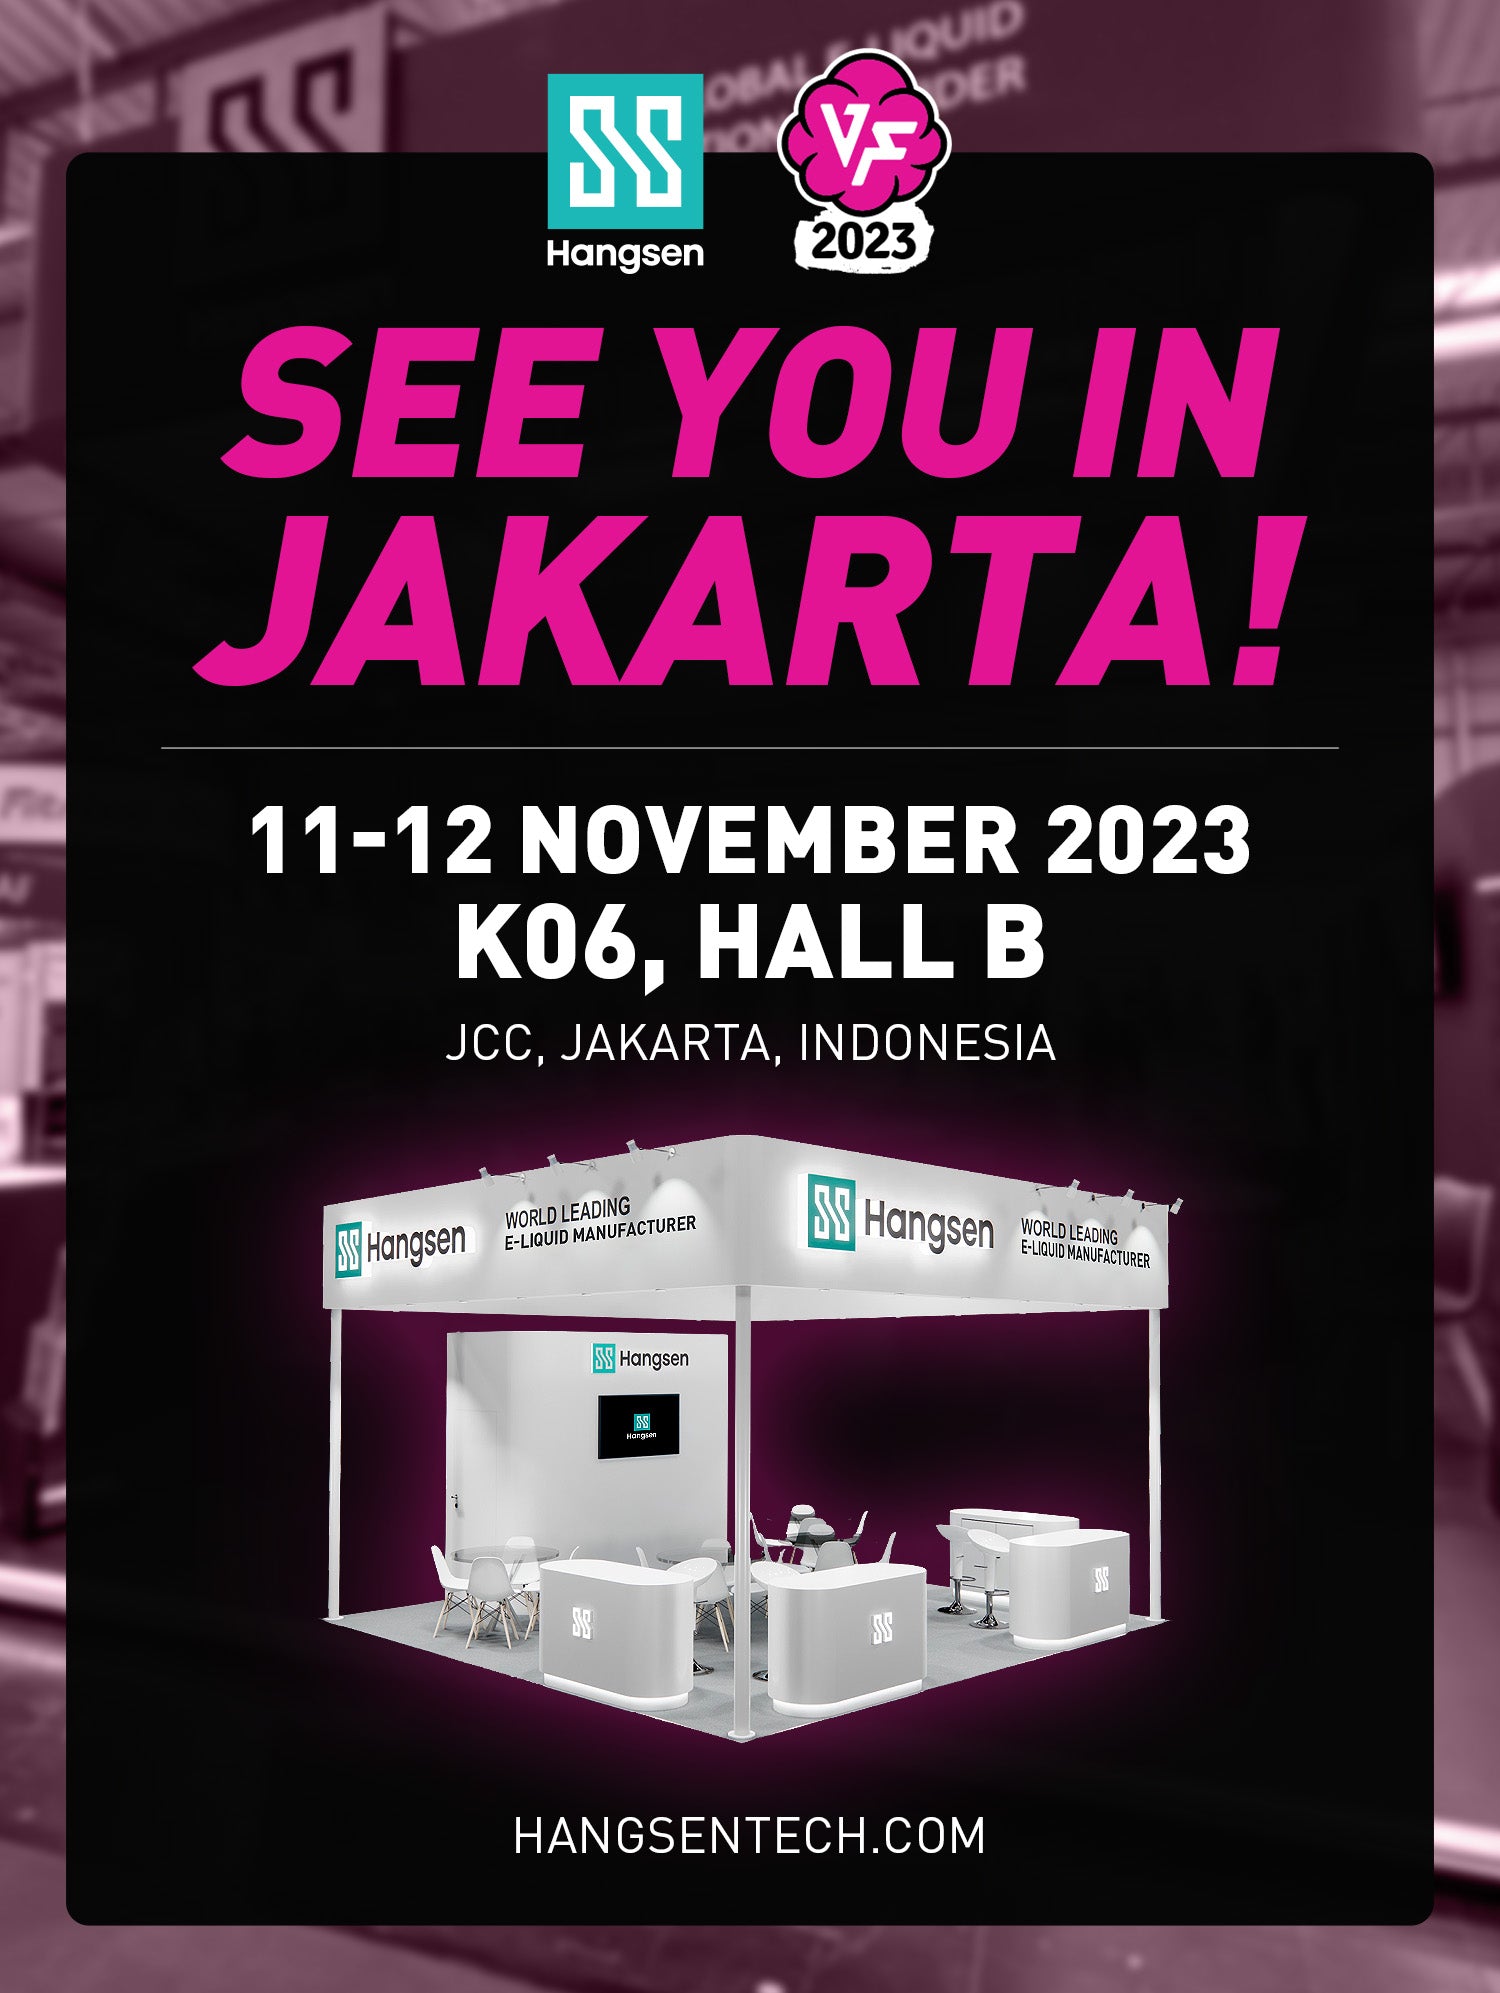 Hangsen has been invited to participate in the Vape Fair 2023 in Jakarta, Indonesia